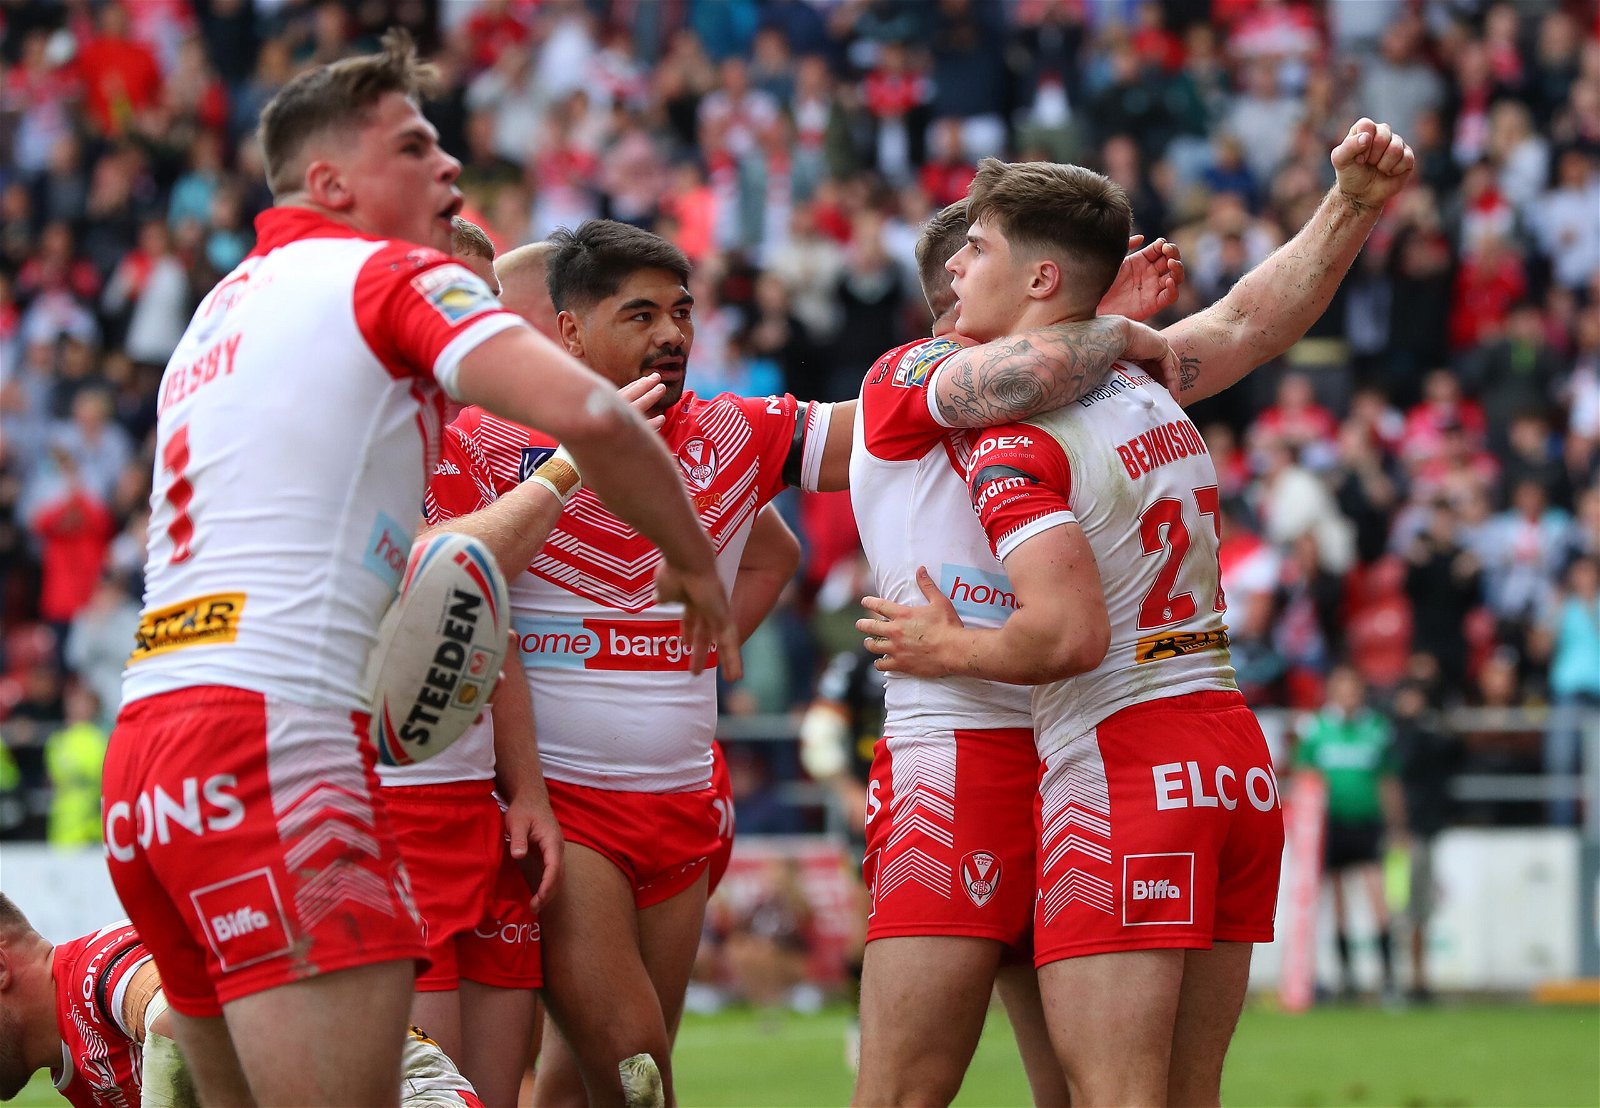 Channel 4 put nine Super League matches free on streaming service